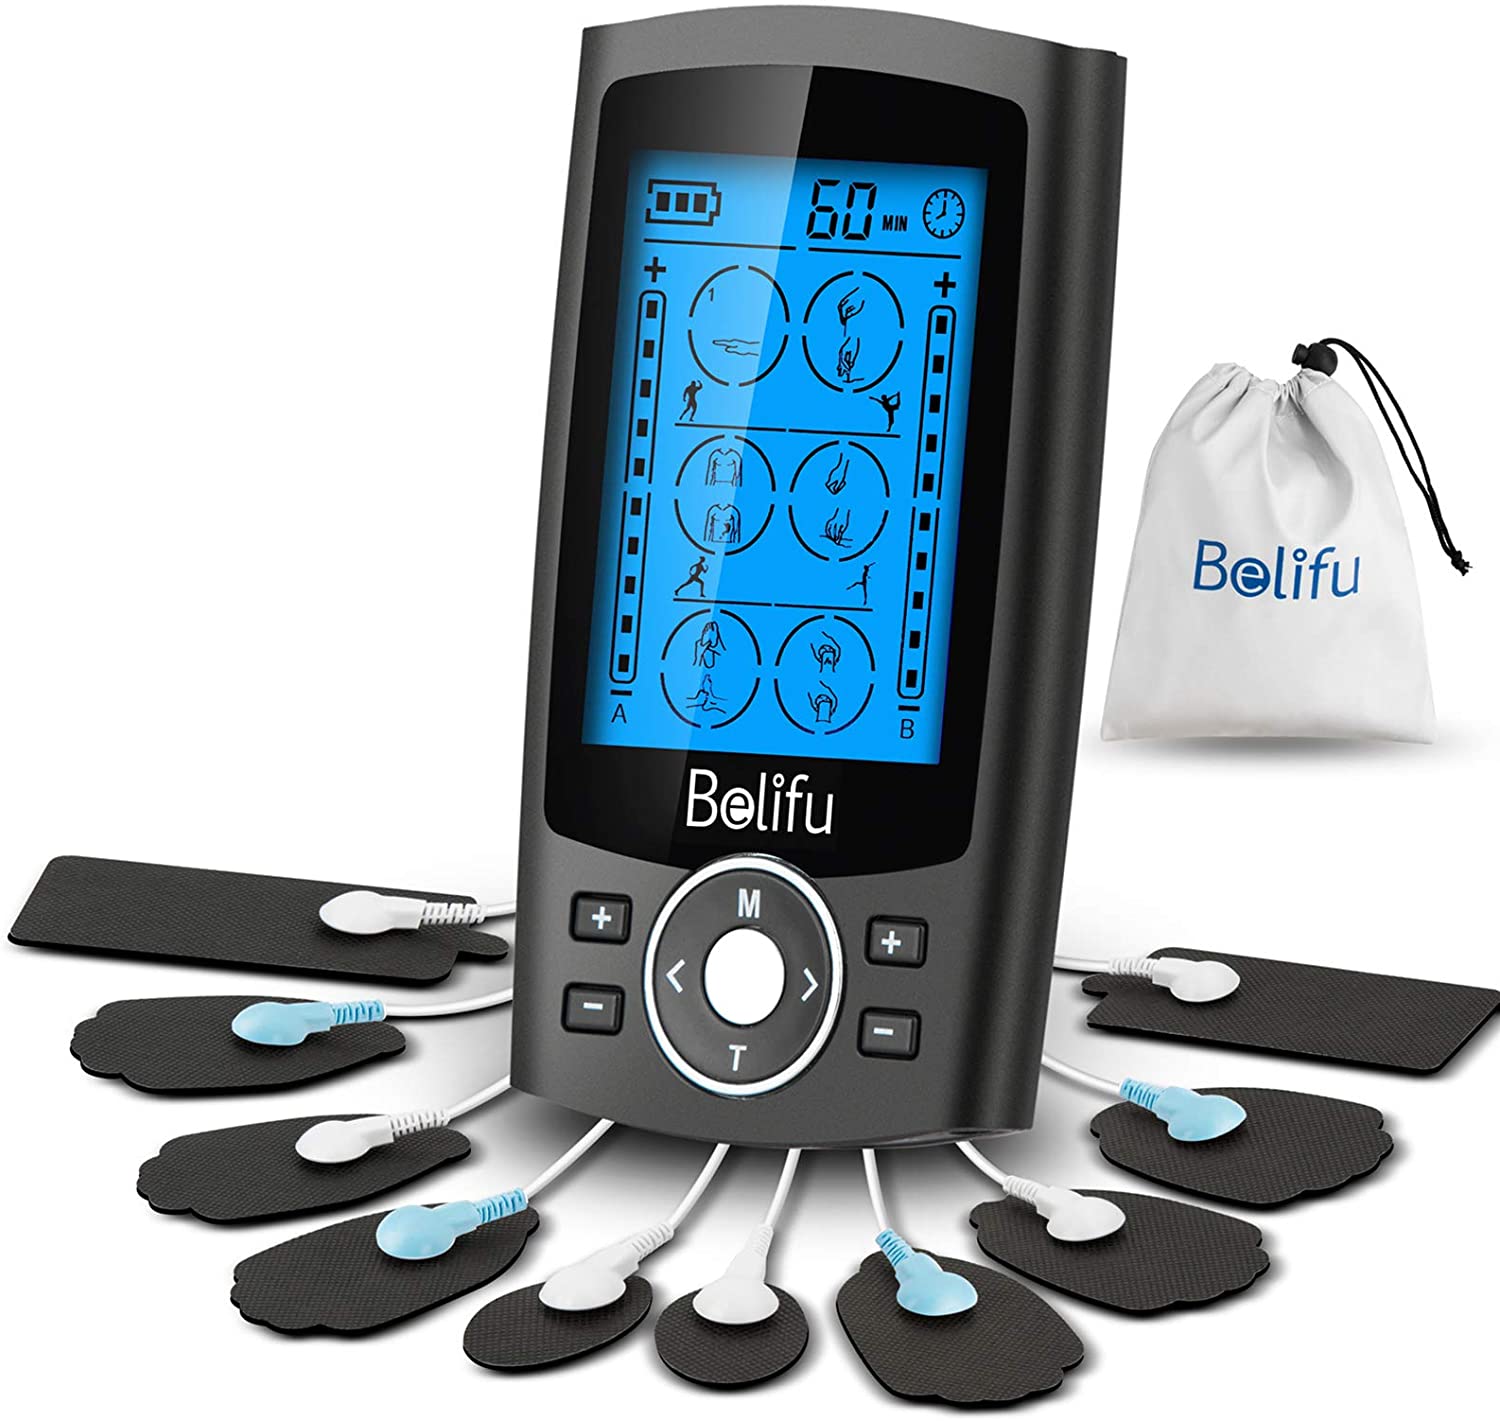 Belifu Preprogrammed TENS Electronic Pulse Muscle Massager Occupational & Physical Therapy Aids